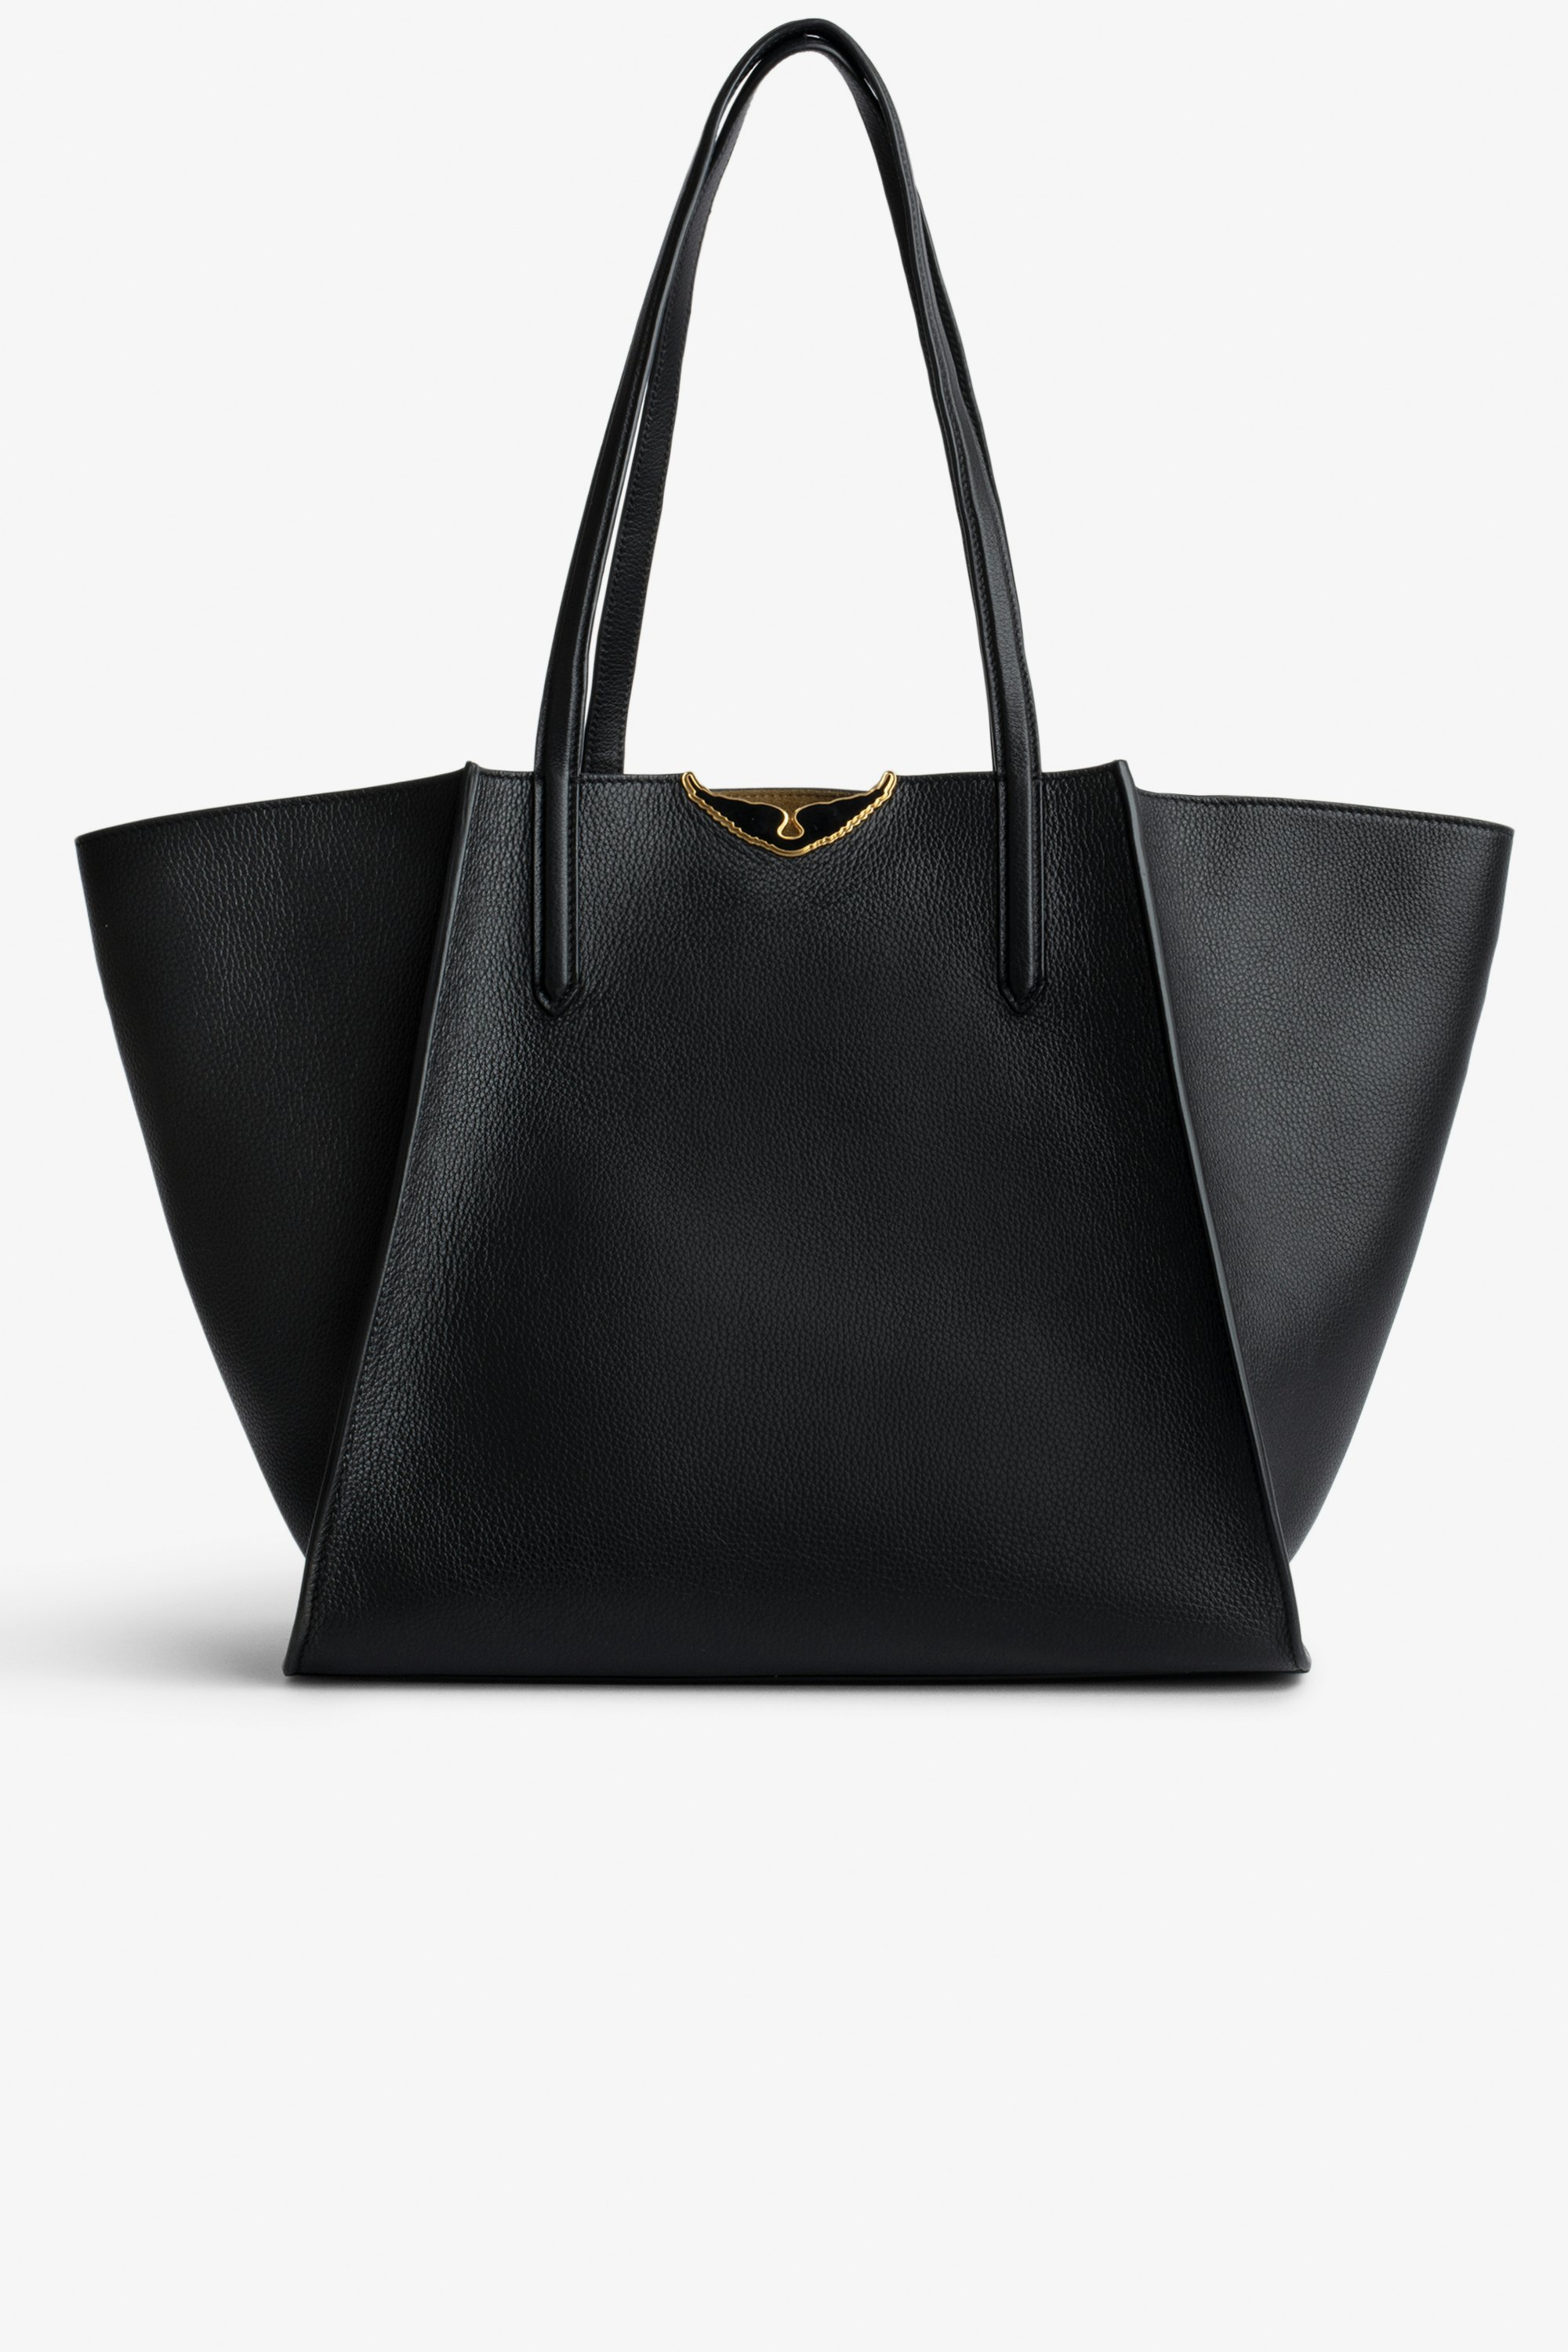 Le Borderline Bag Women's tote bag in black grained leather and khaki suede with black lacquered wings